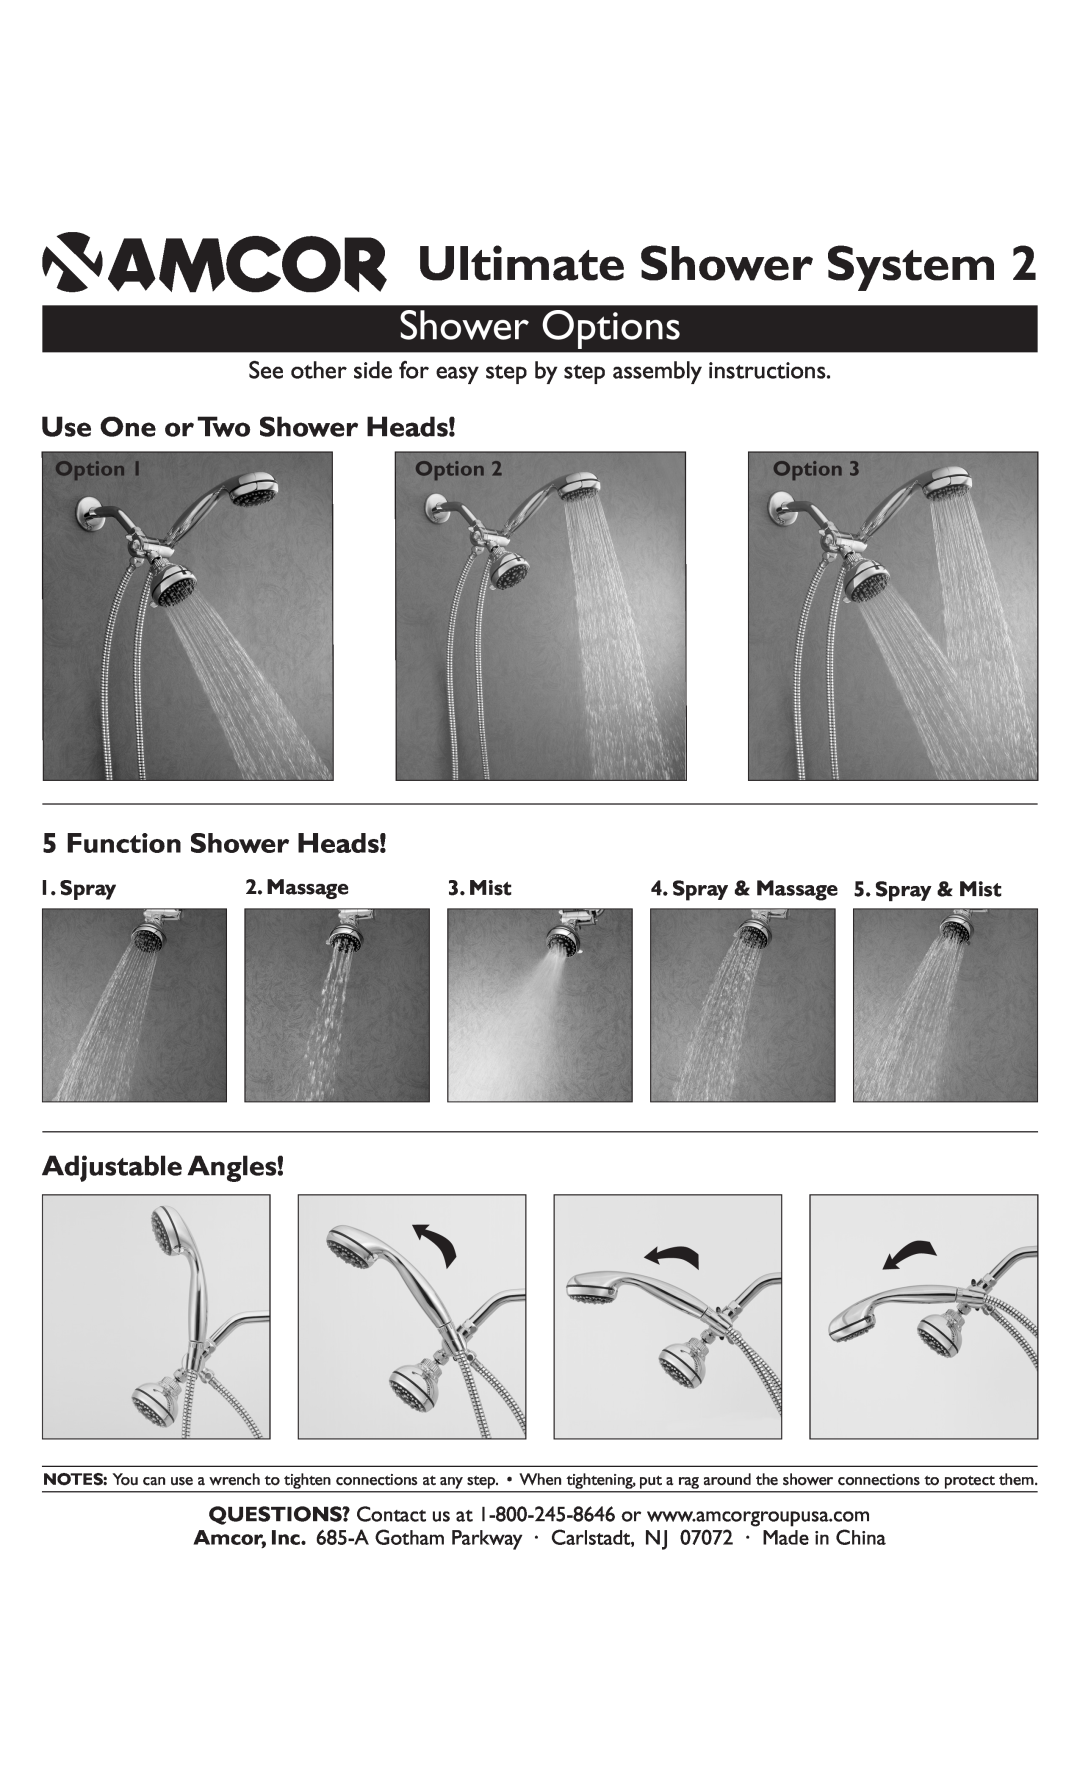 Amcor Ultimate Shower System manual Shower Options, Use One or Two Shower Heads, Function Shower Heads, Adjustable Angles 